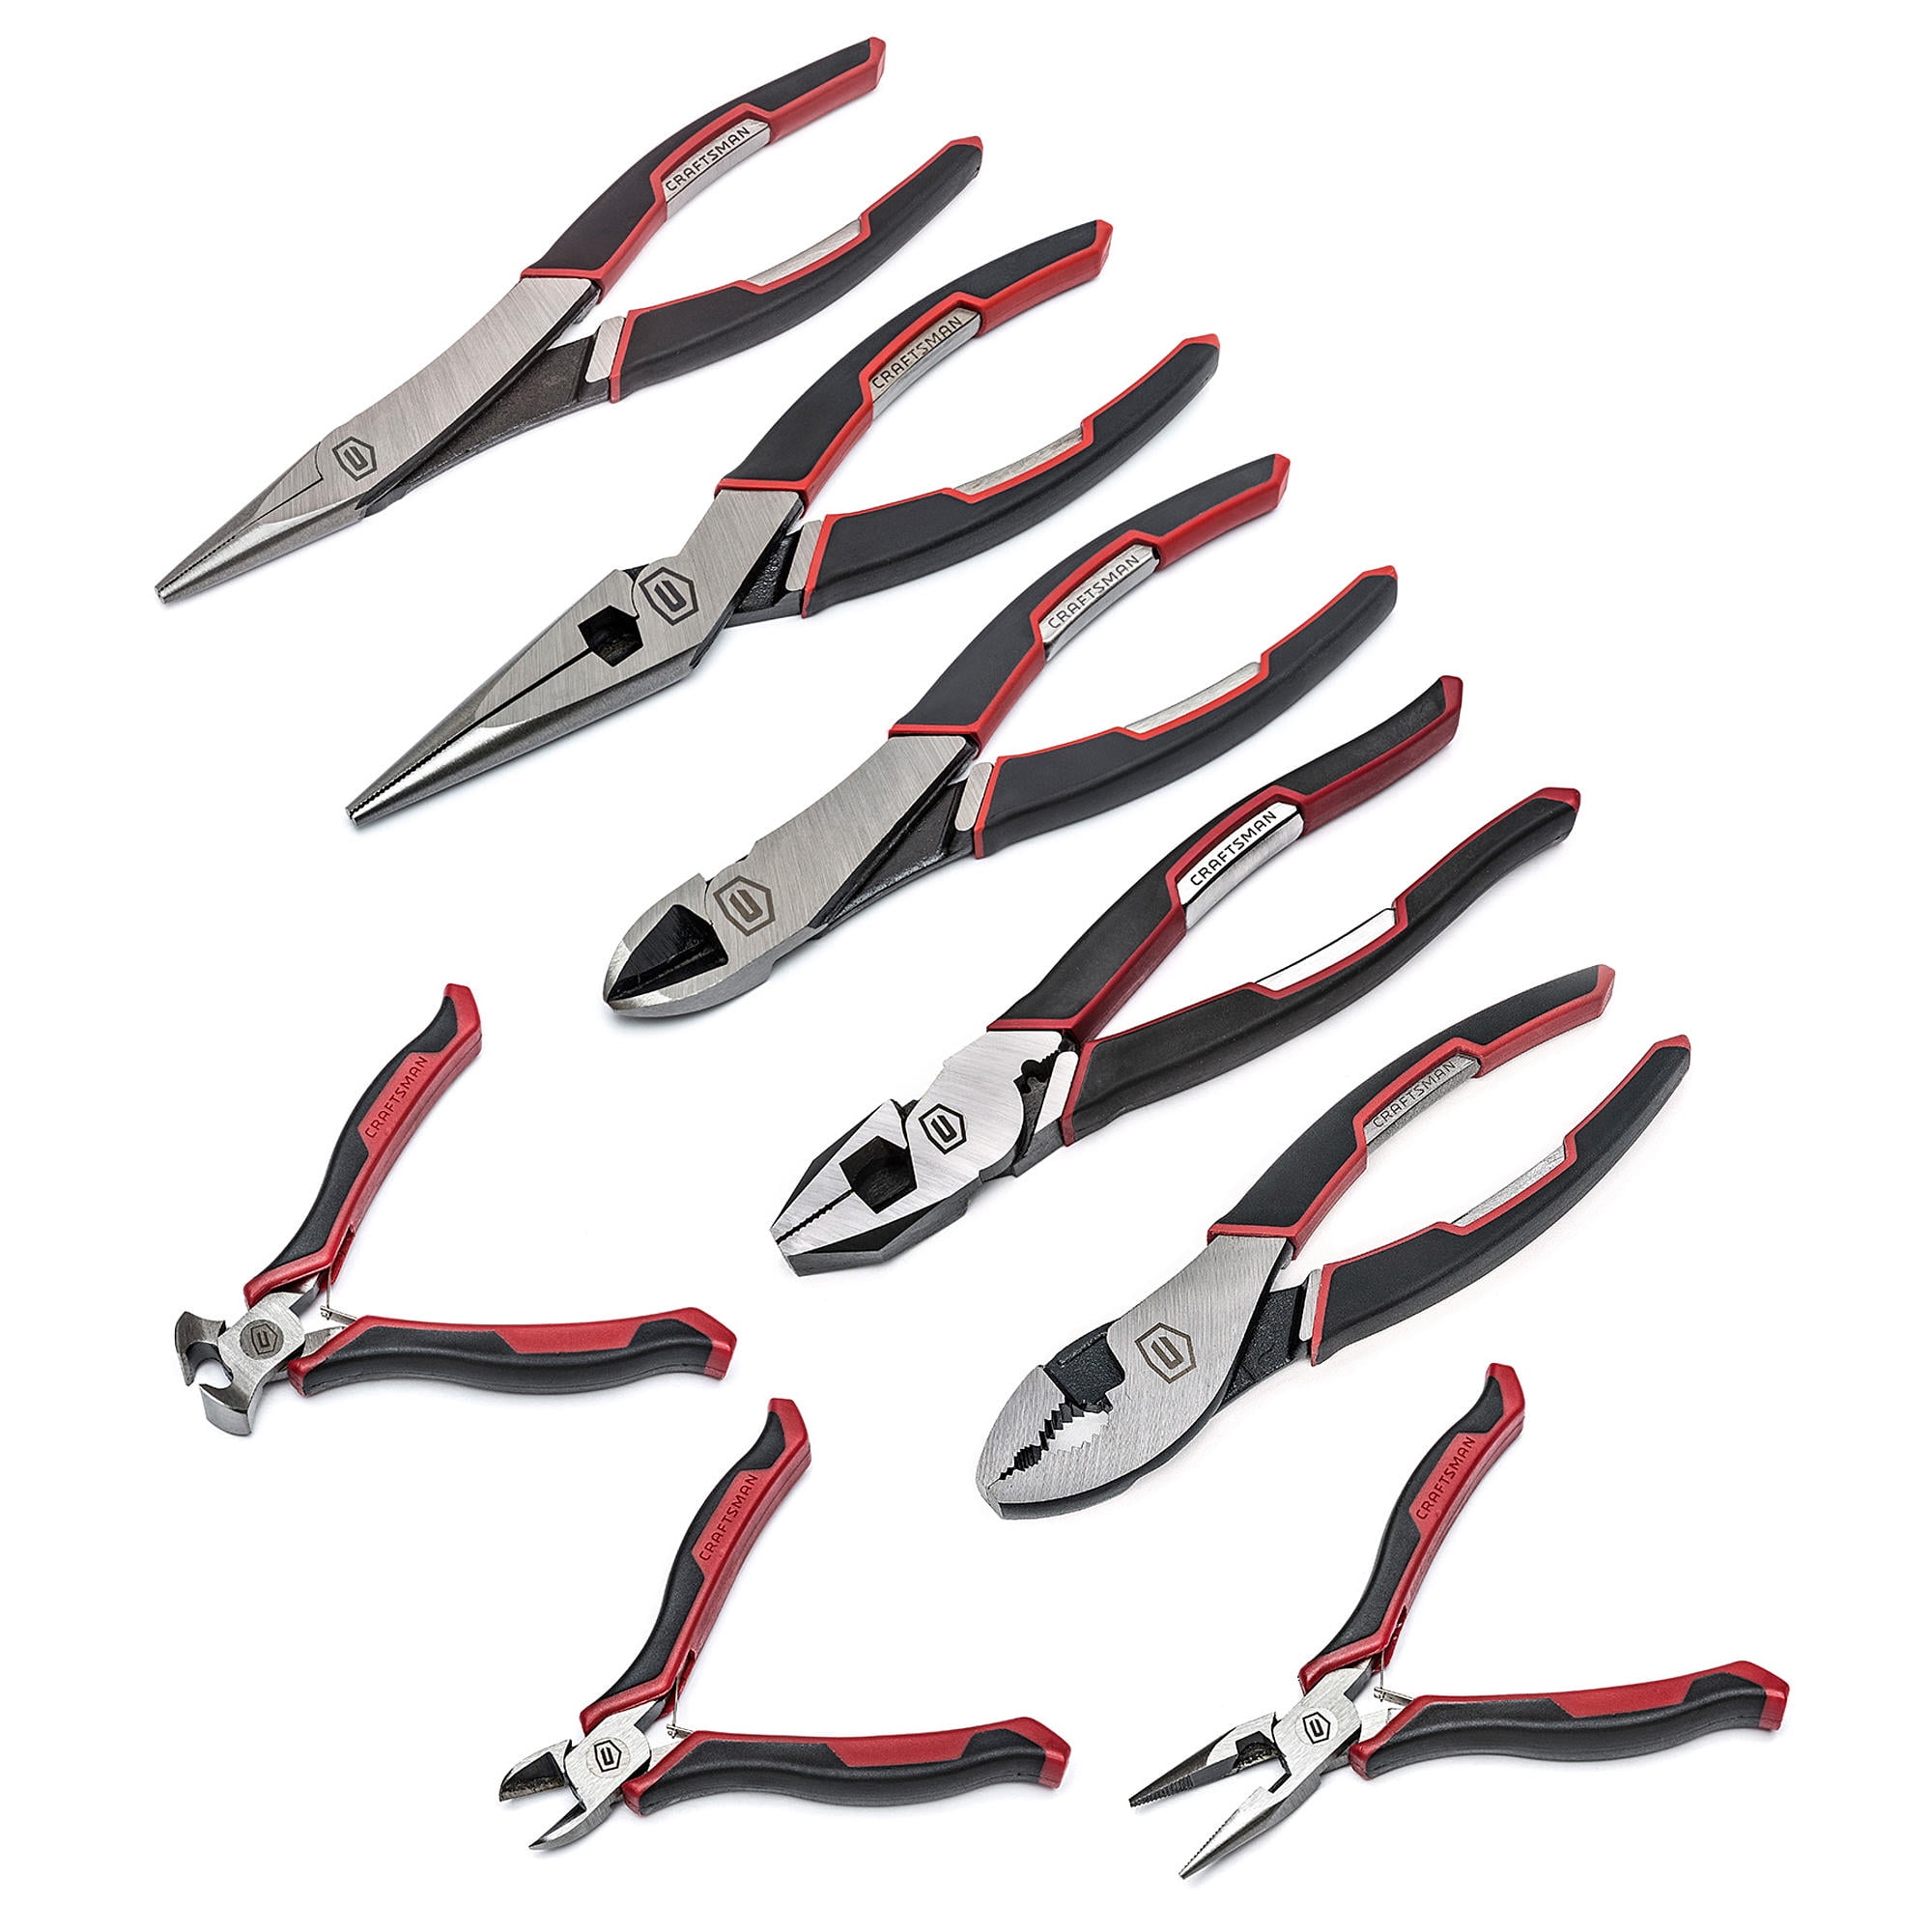 Craftsman Long Nose Pliers 10 in. Long Reach Needle-Nose TruGrip Handles  Hand Tool 71637